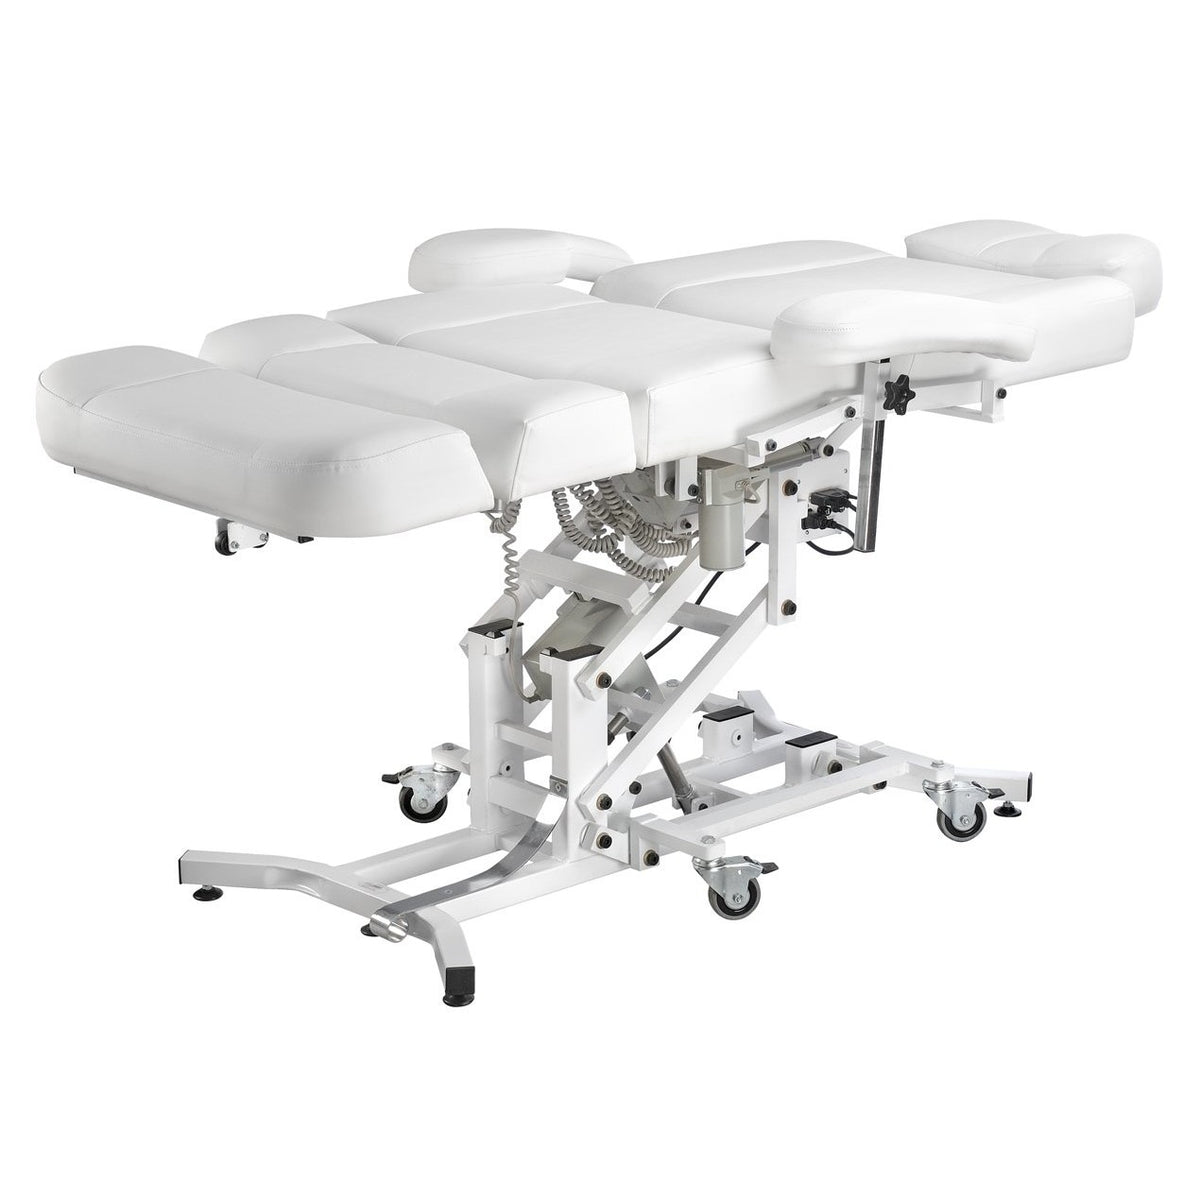 Equipro Equipro Ultra Comfort - Electric Para-Medical Therapeutic Treatment Table Massage &amp; Treatment Table - ChairsThatGive